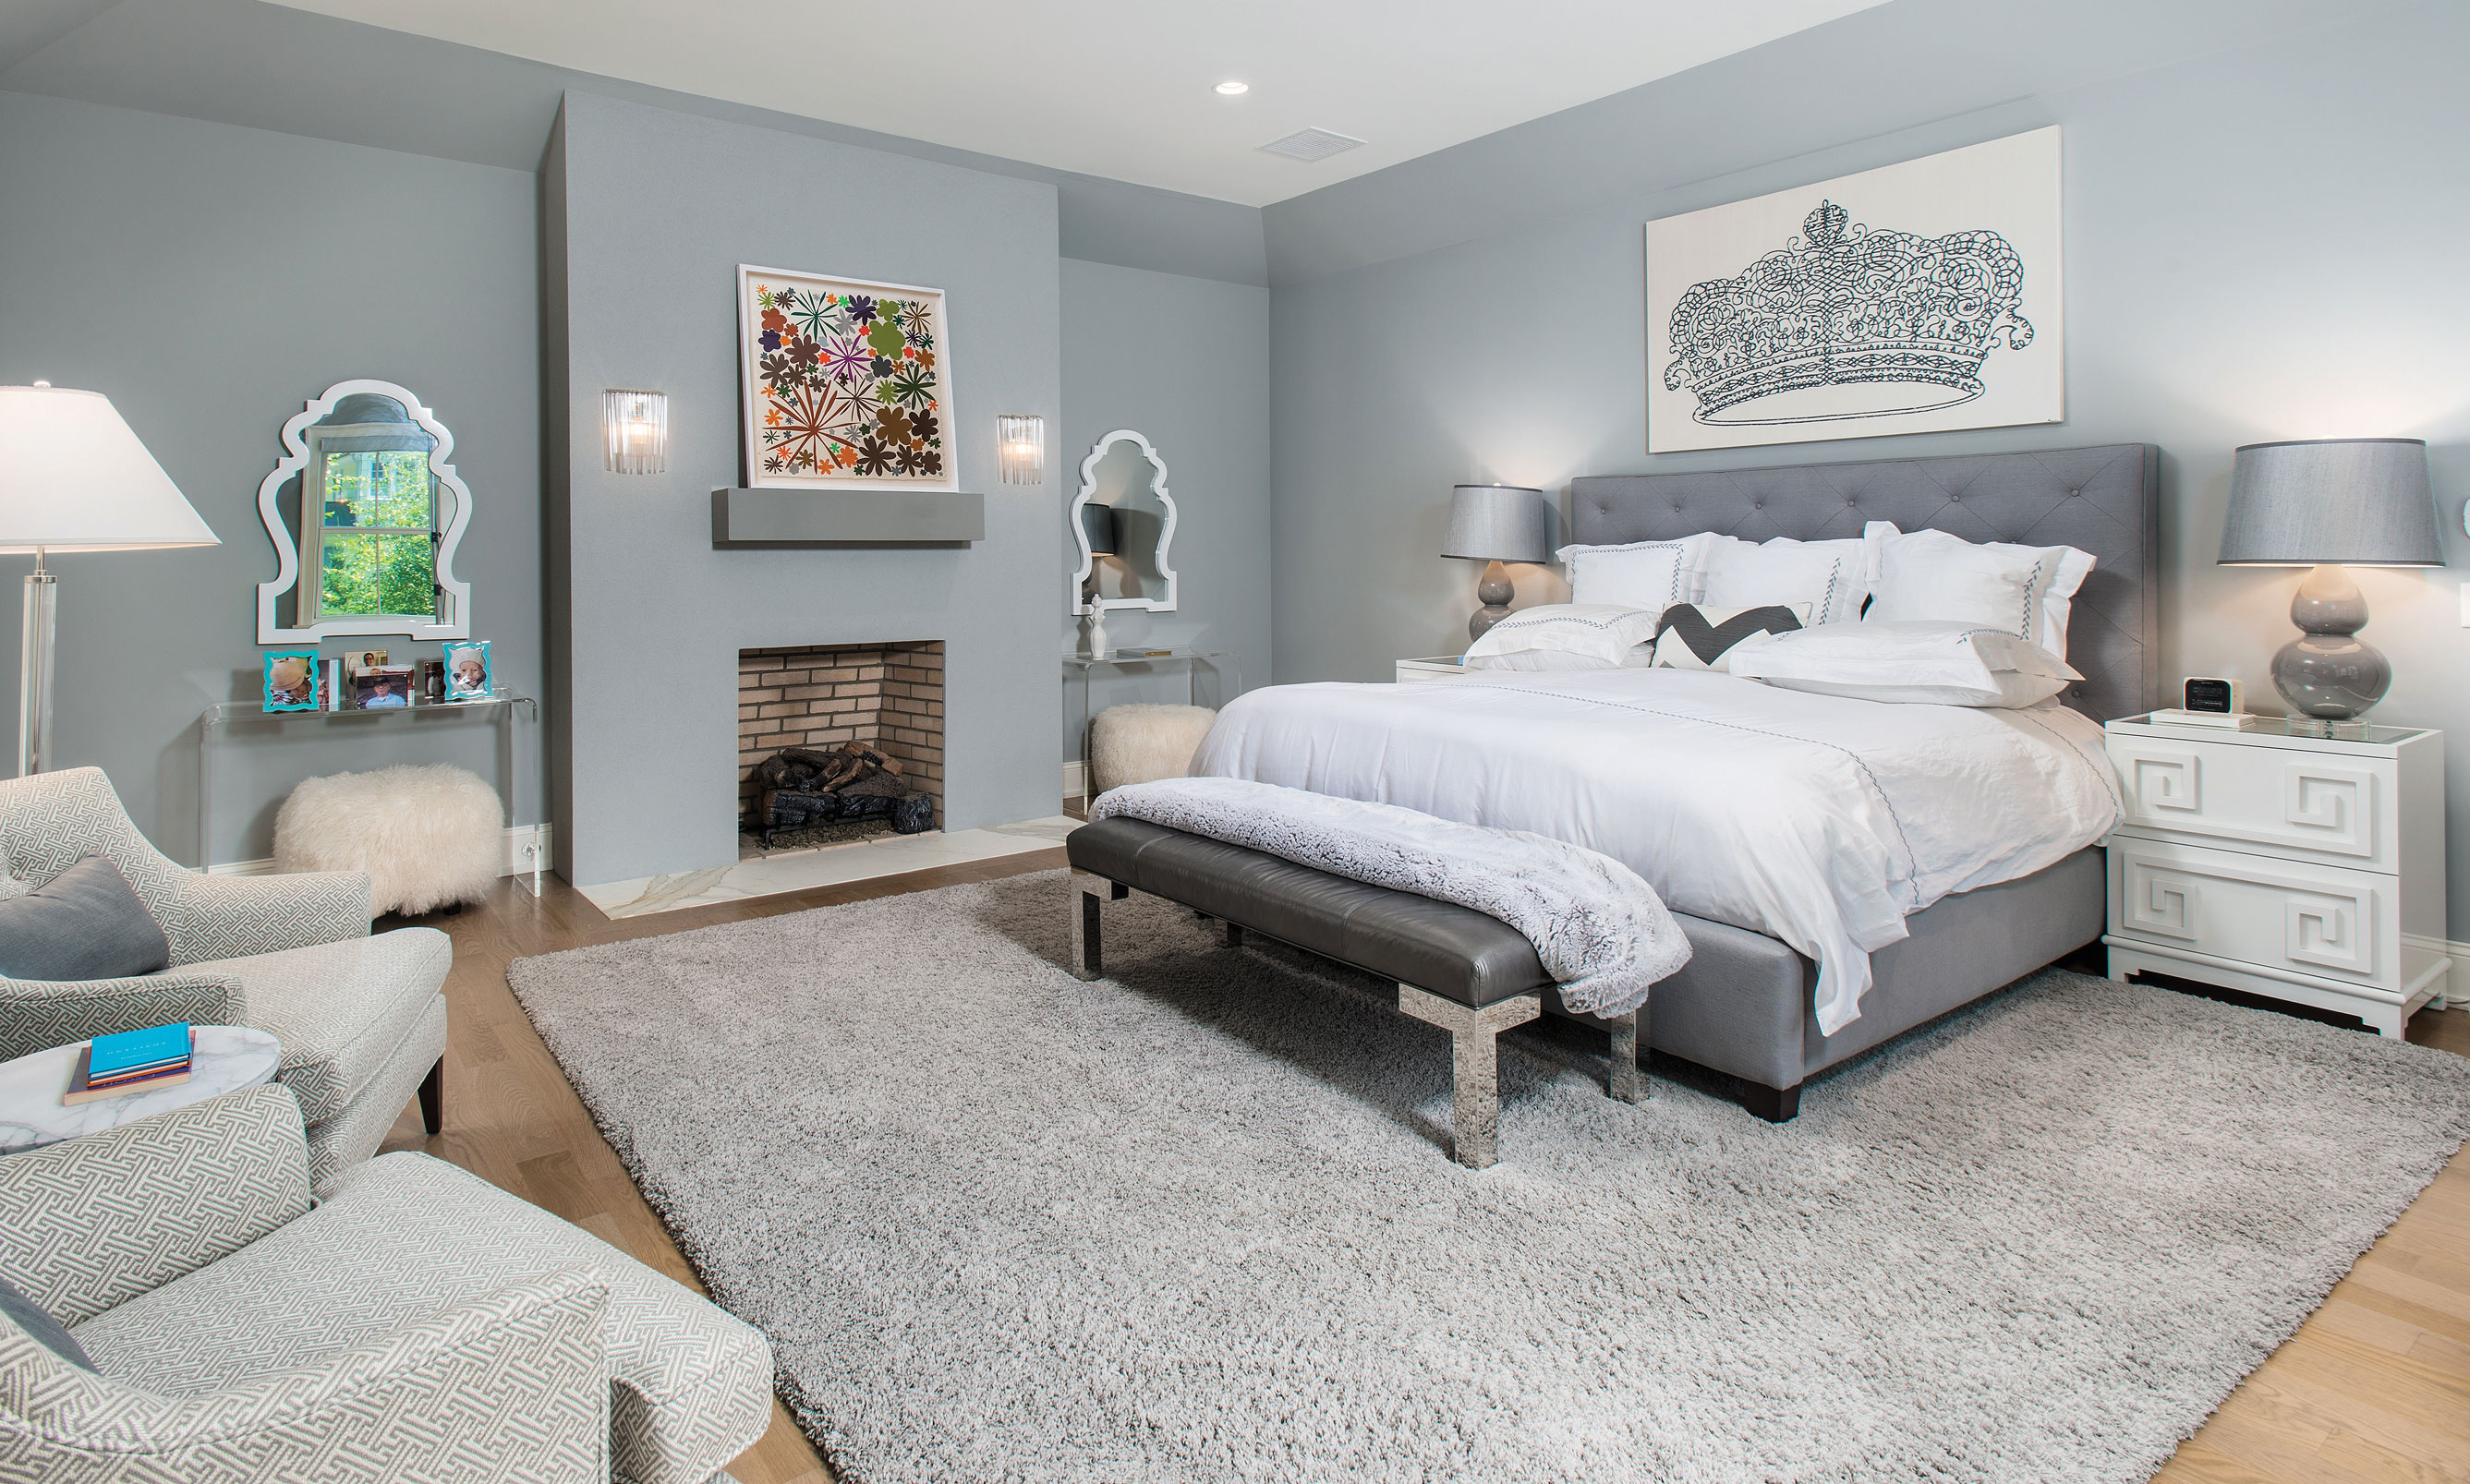 A master bedroom demonstrates how traditional is still key in real estate trends in 2019